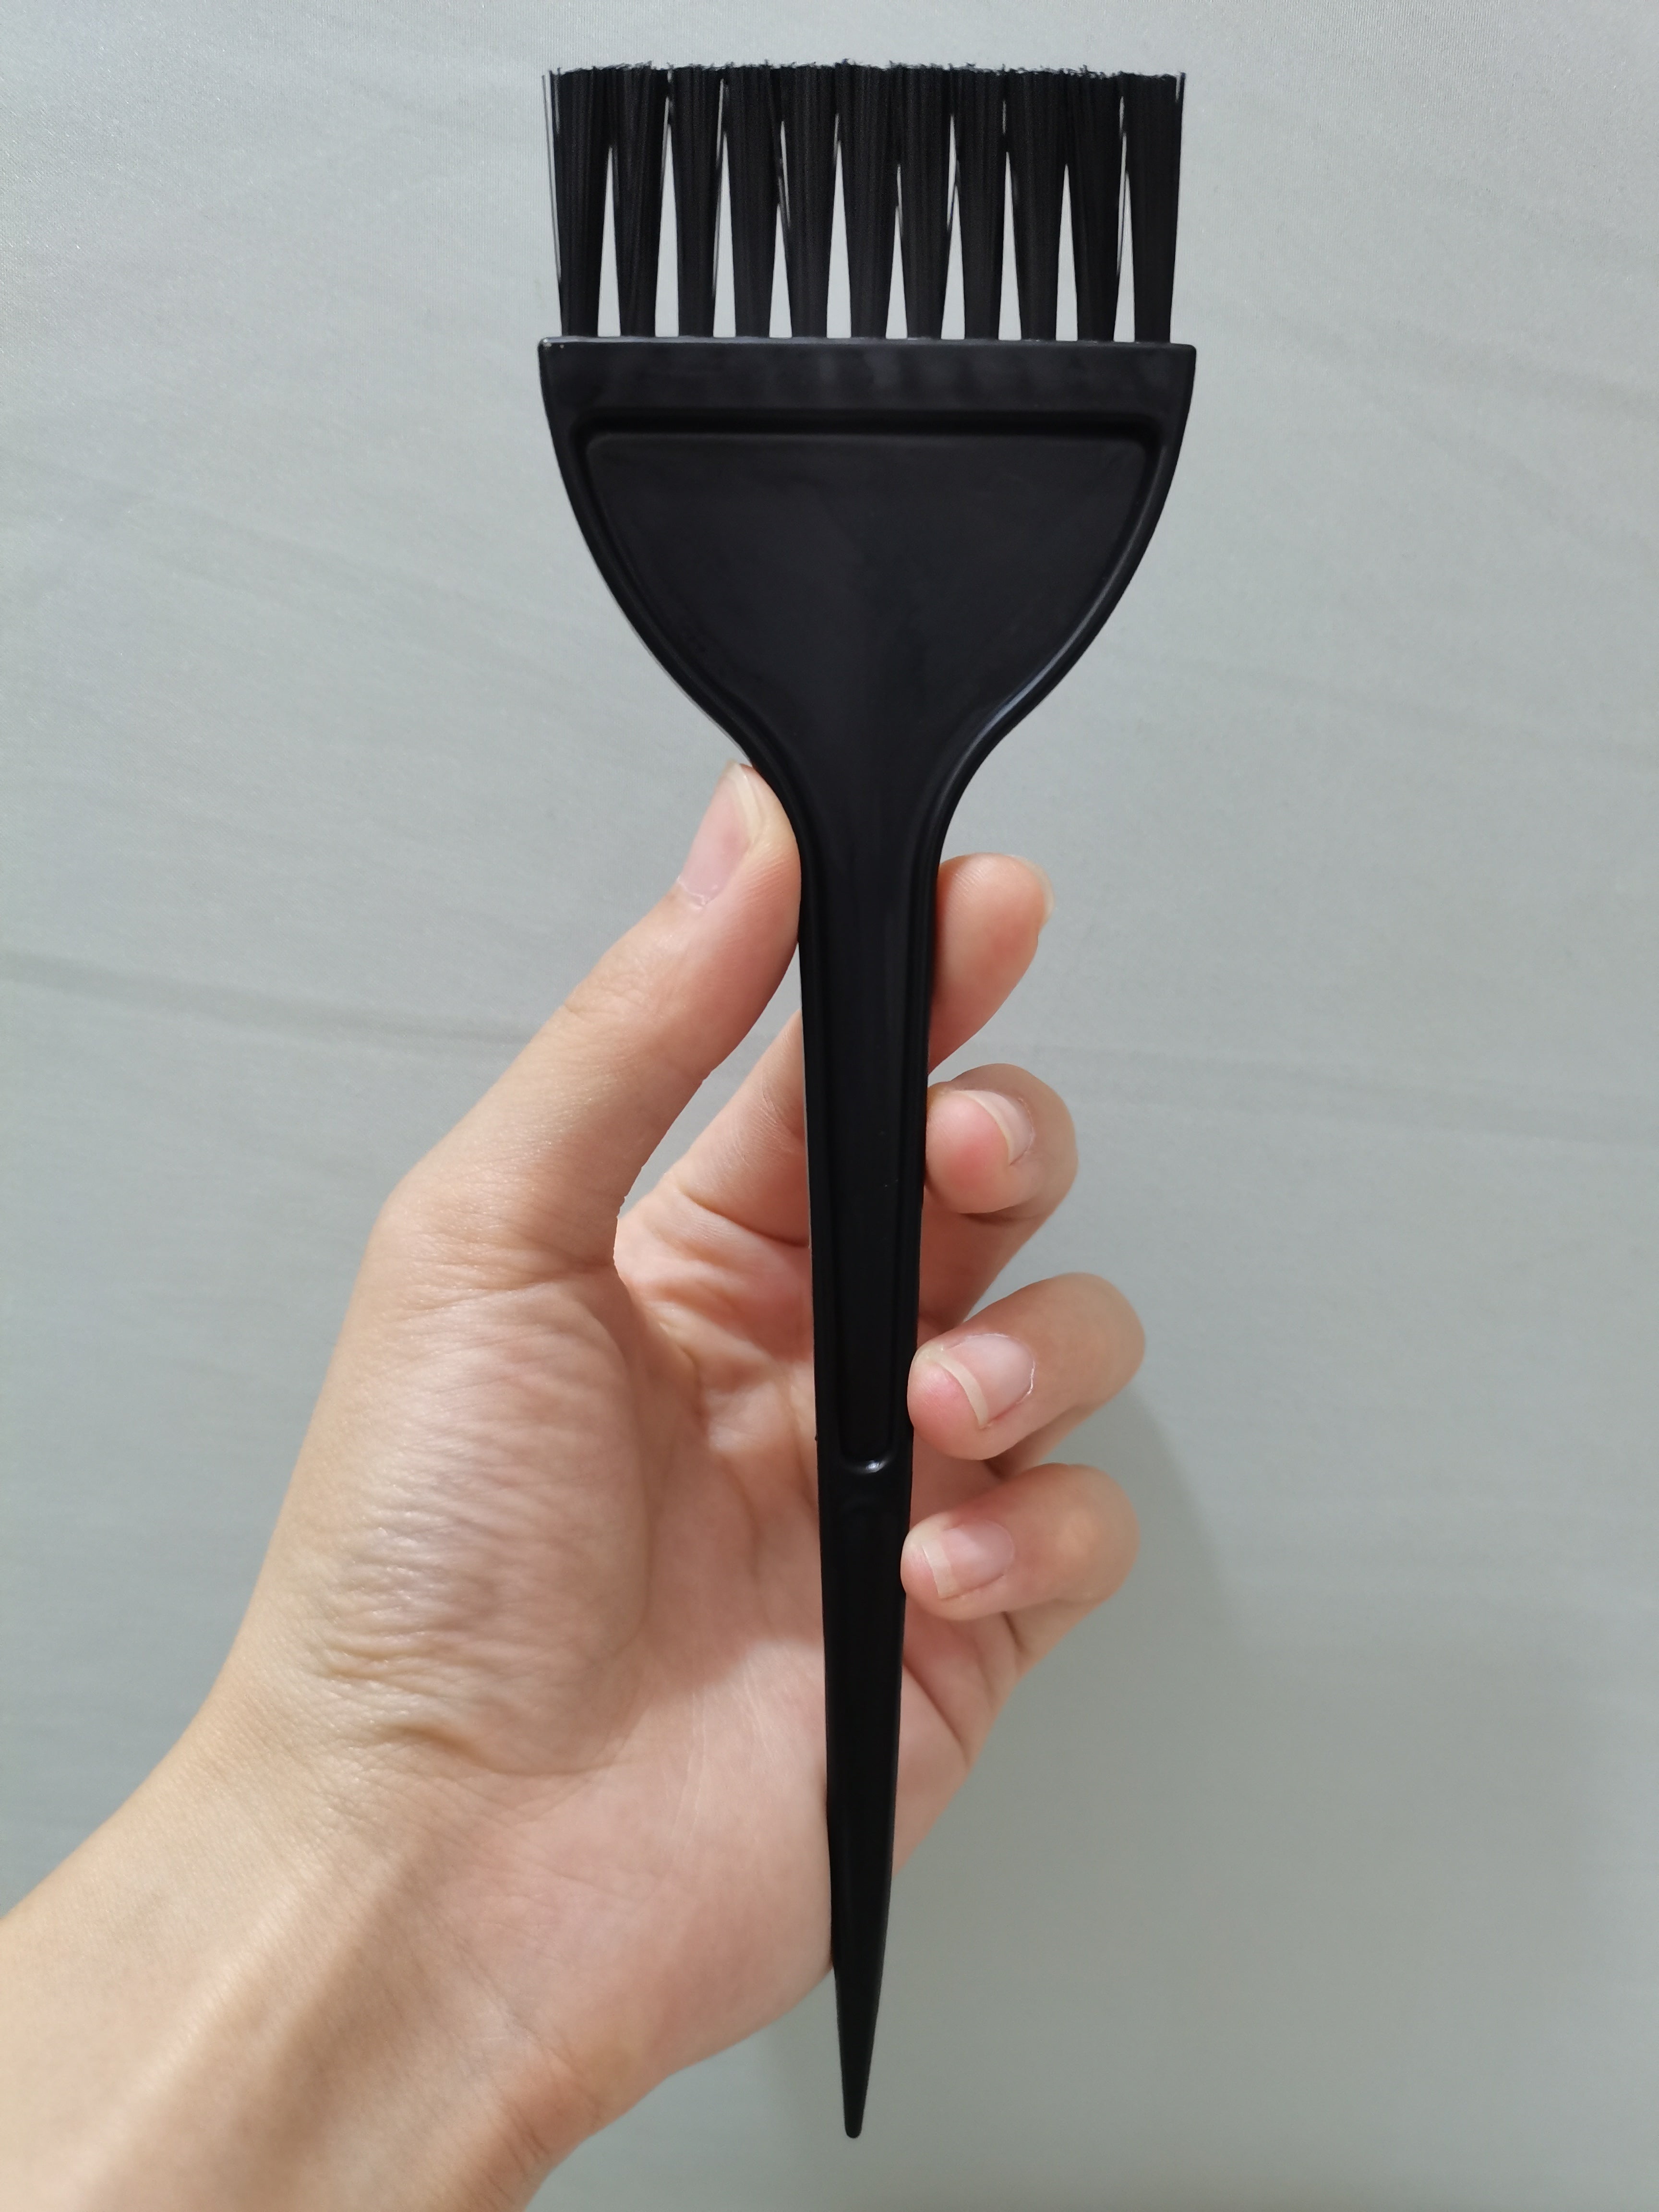 Tint Brush Large - Precise Hair Colouring Tool for Full Coverage - beautyhair.co.ukHair Tinting Briush